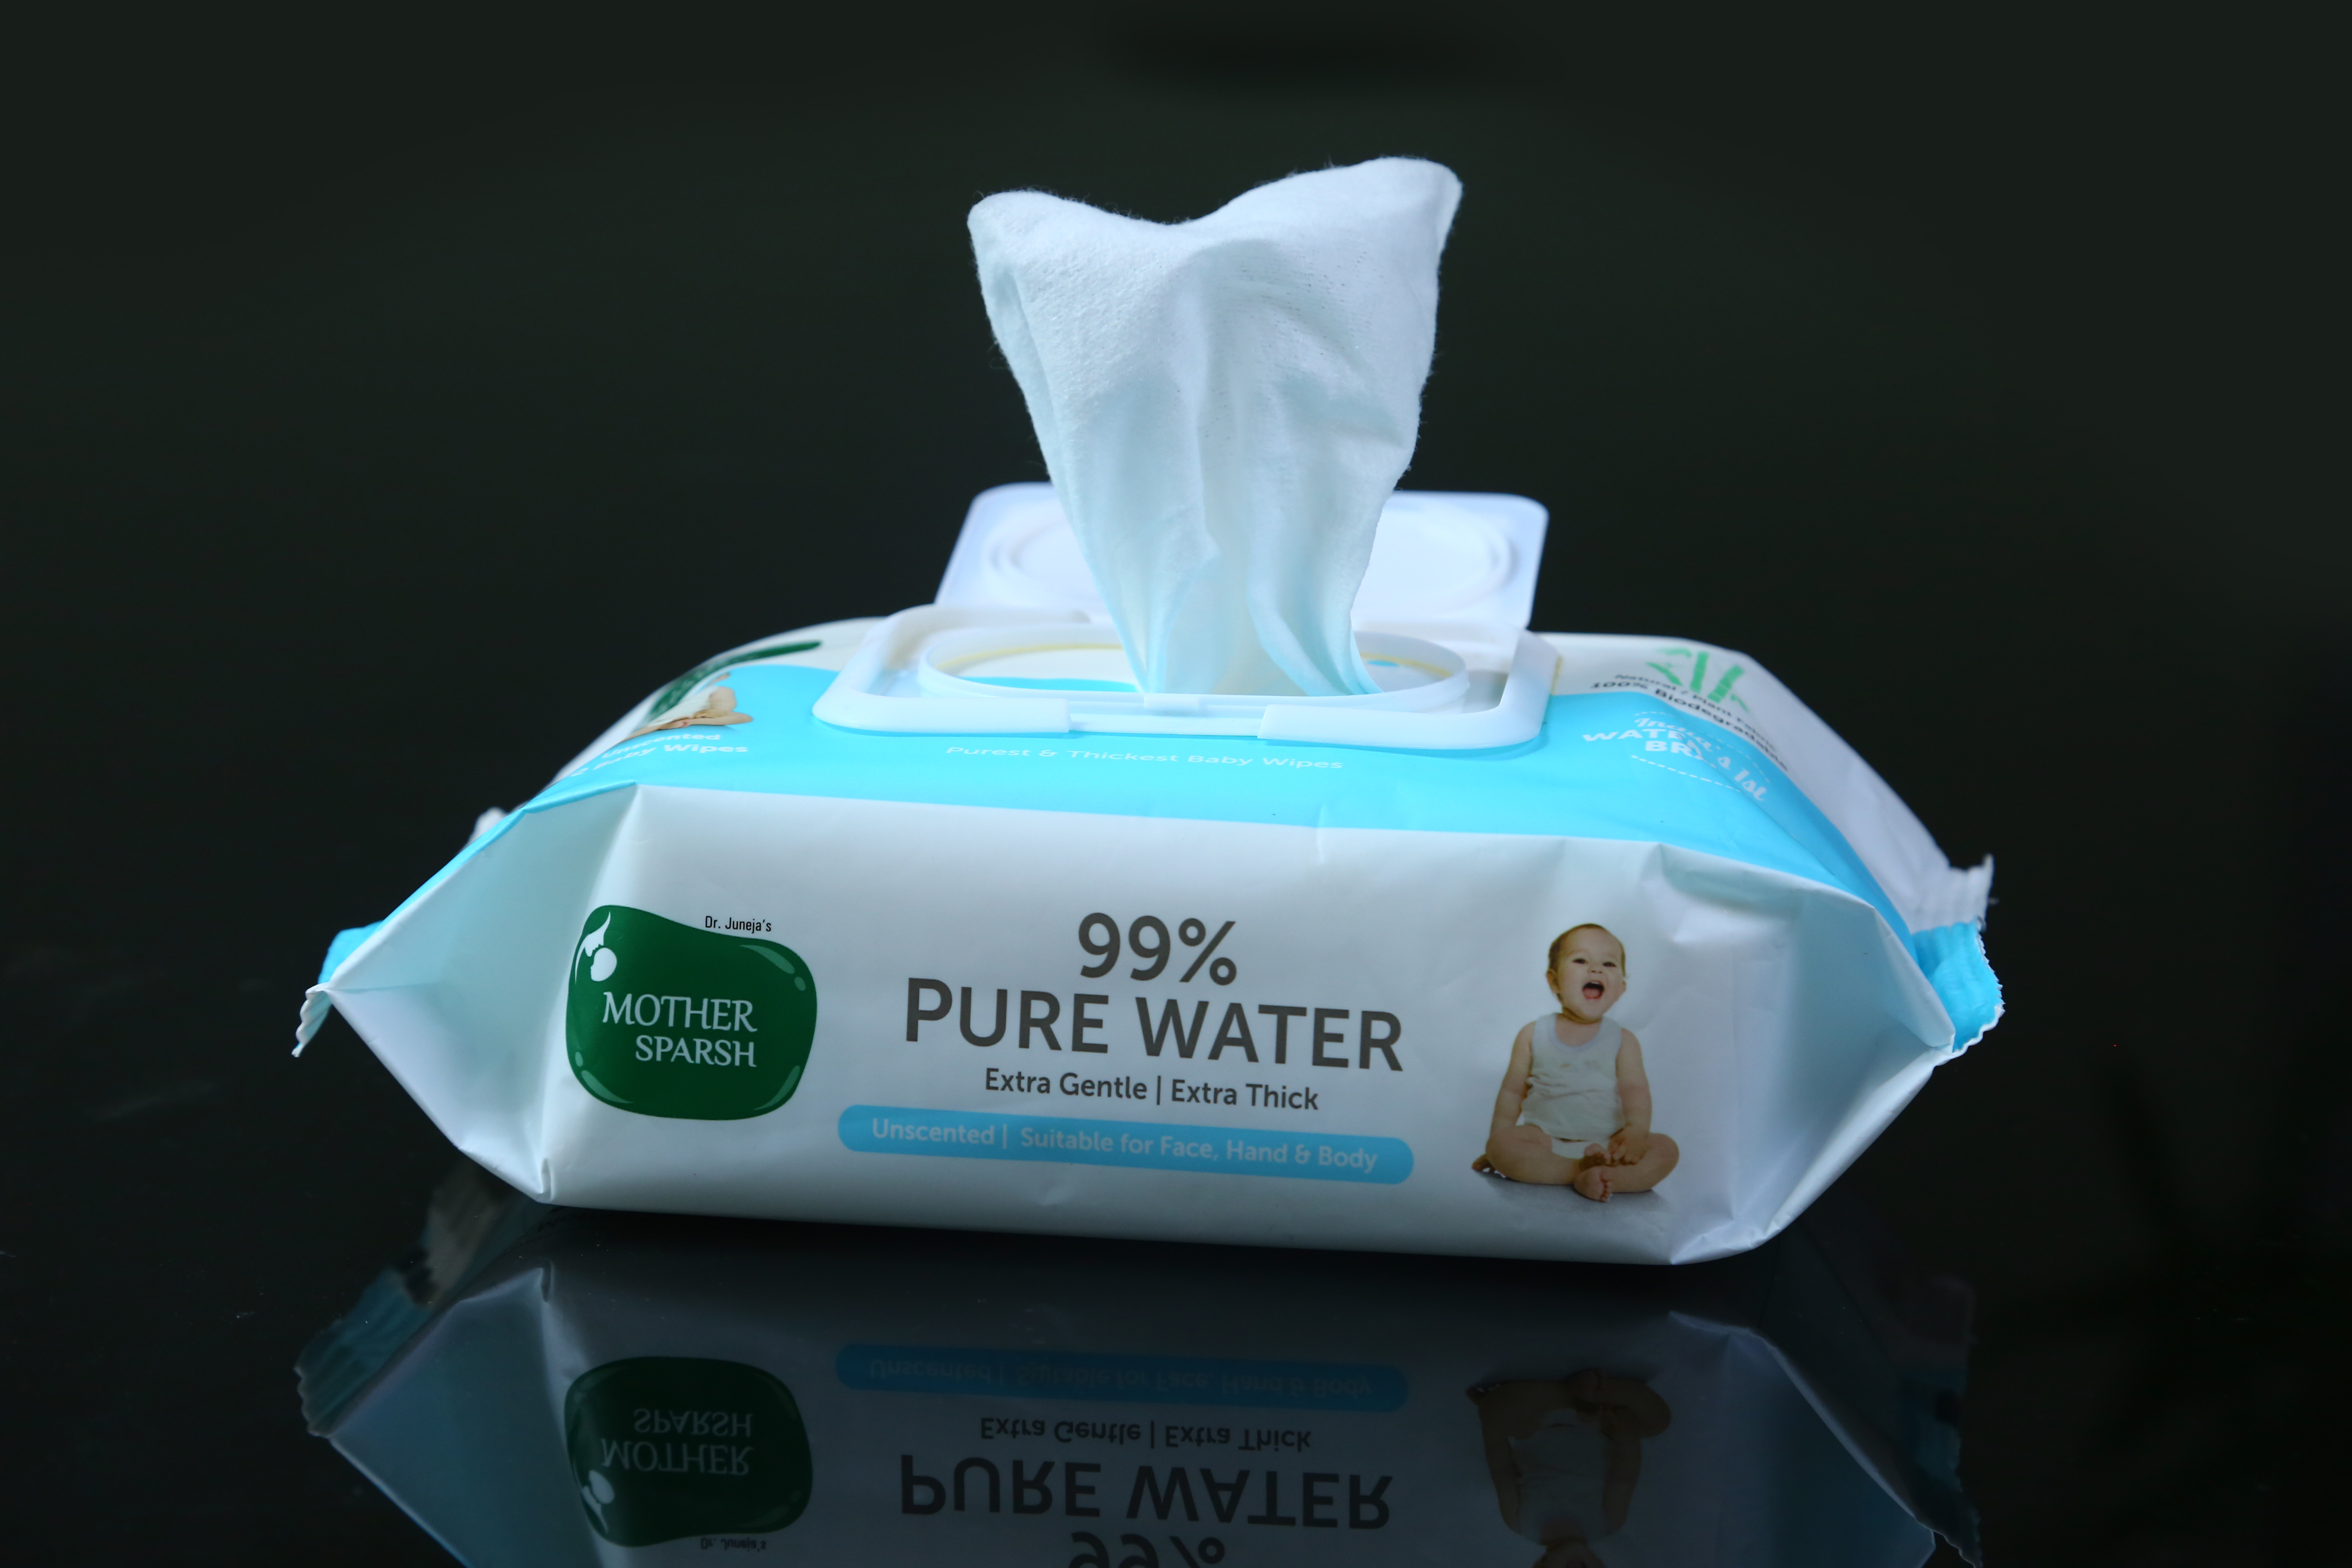 99% pure water wipes Mother Sparsh